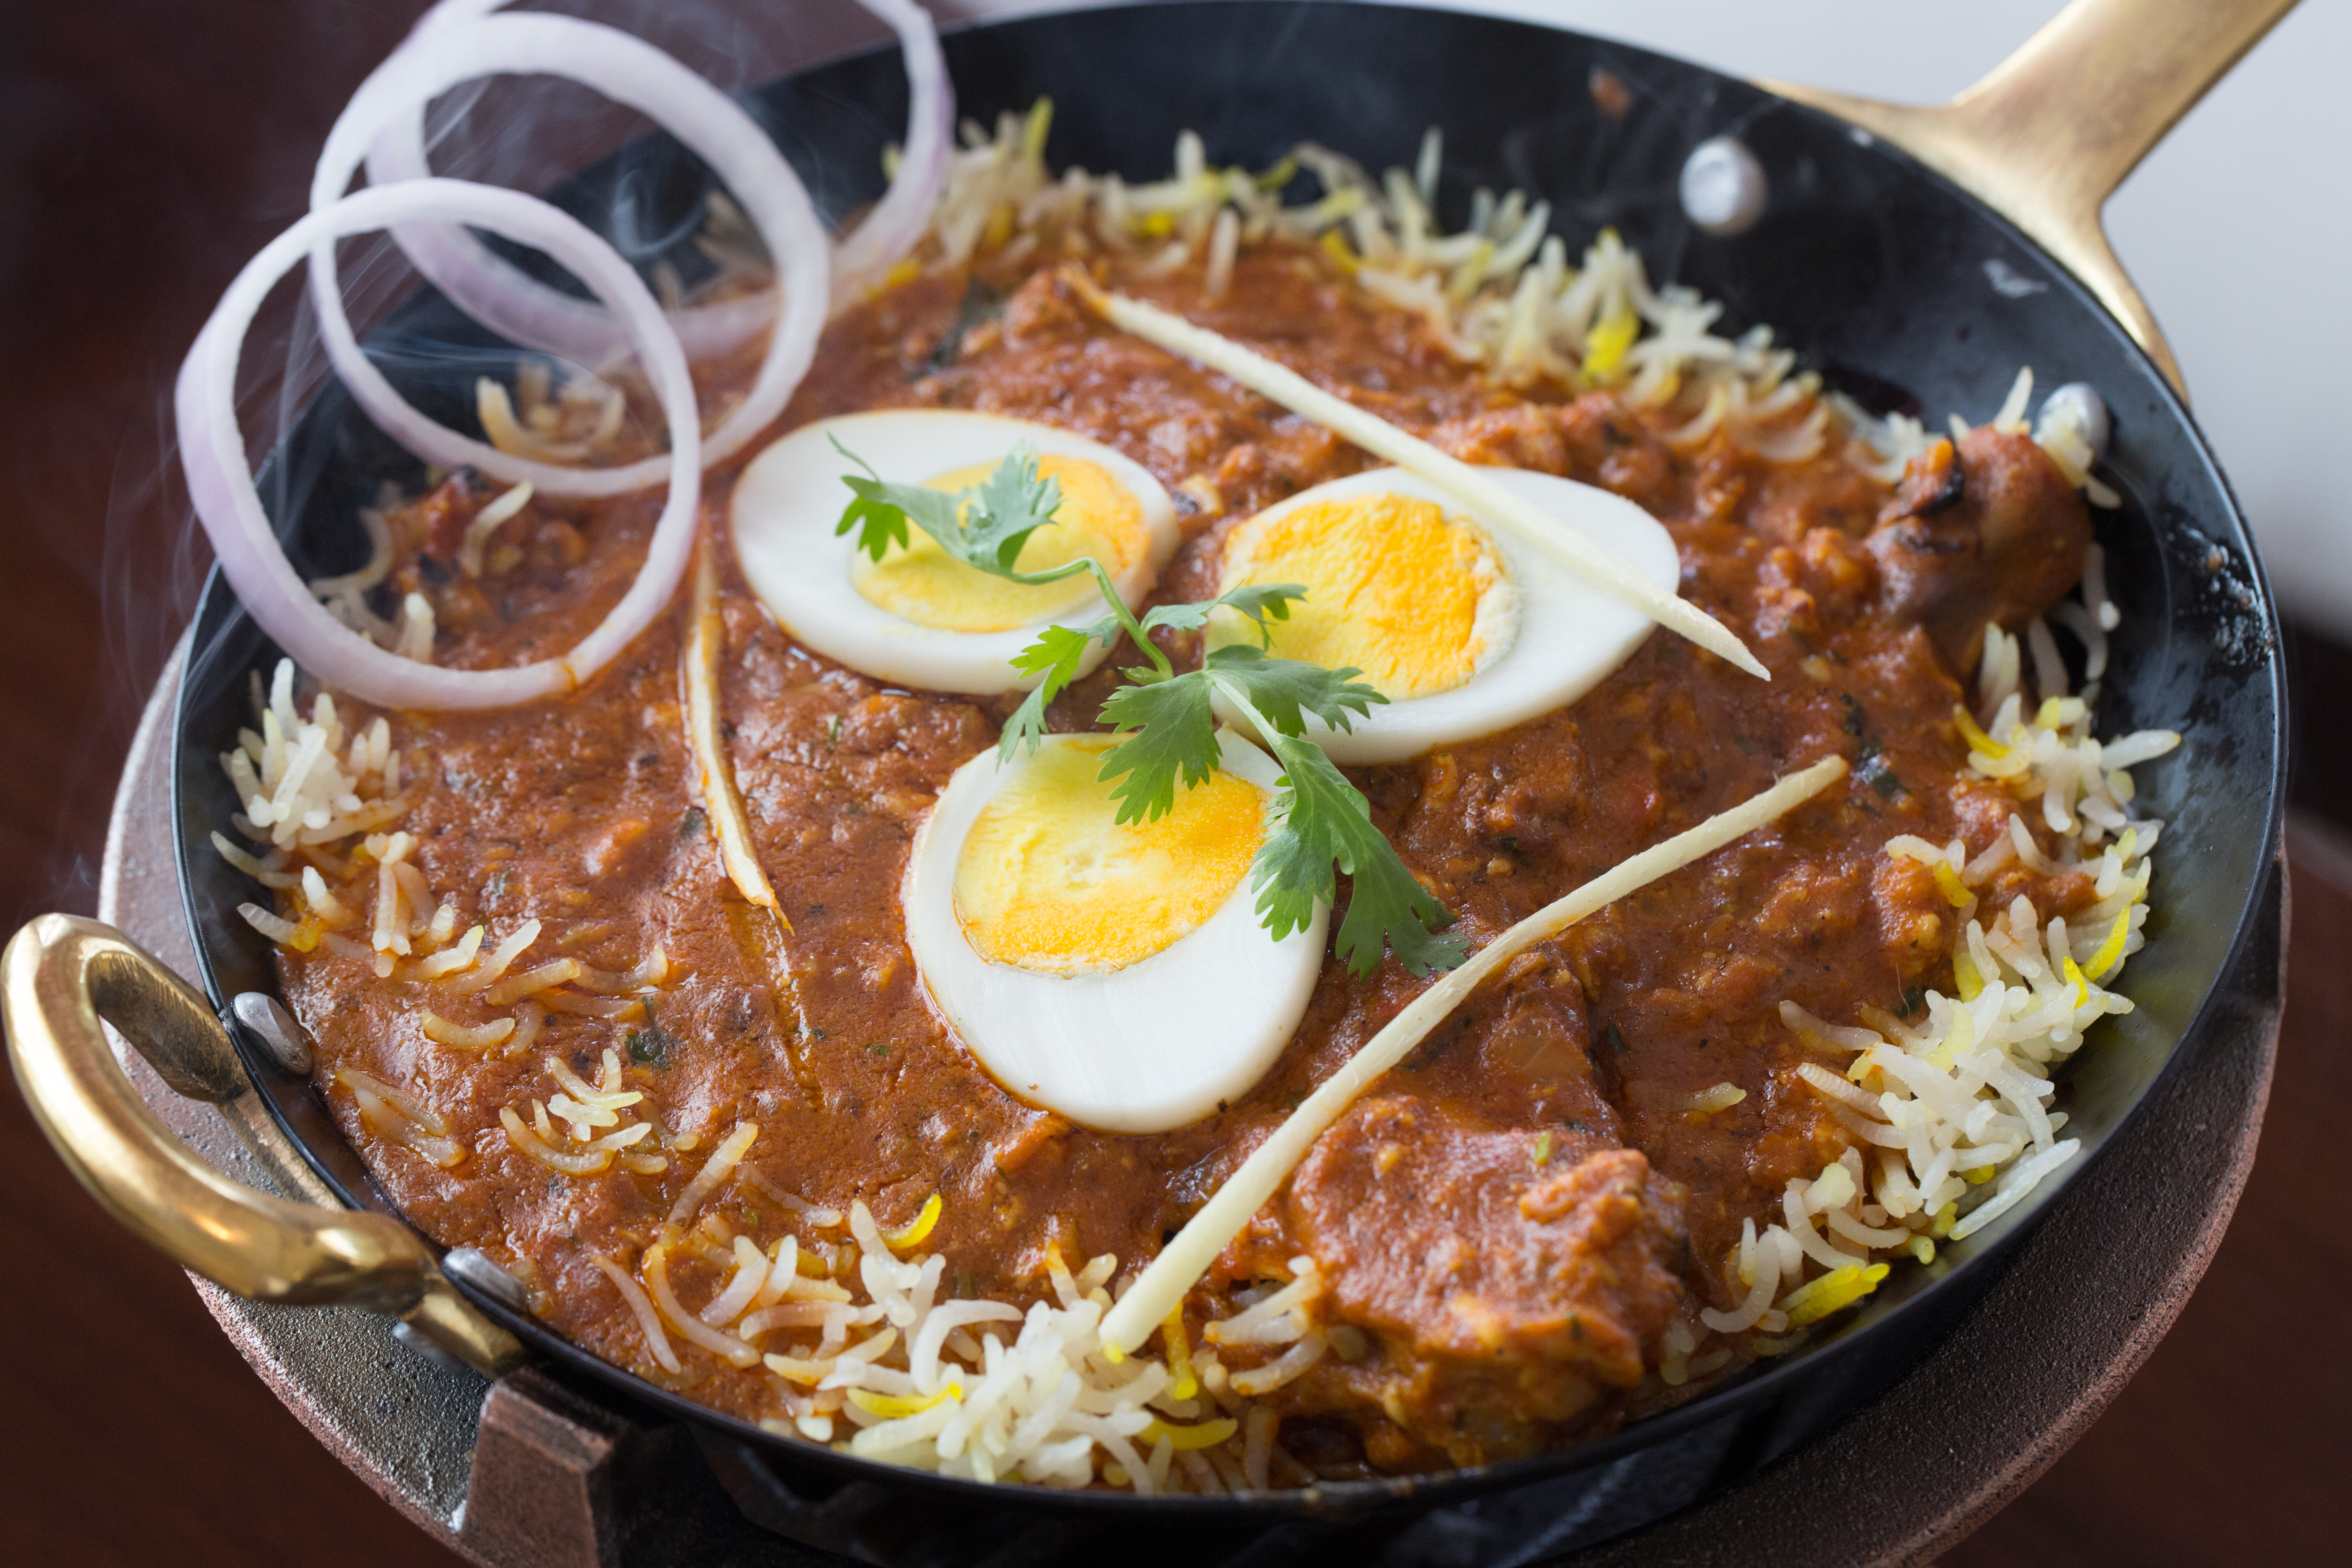 Oman dining: New authentic Indian restaurant in town, Spice Bahar